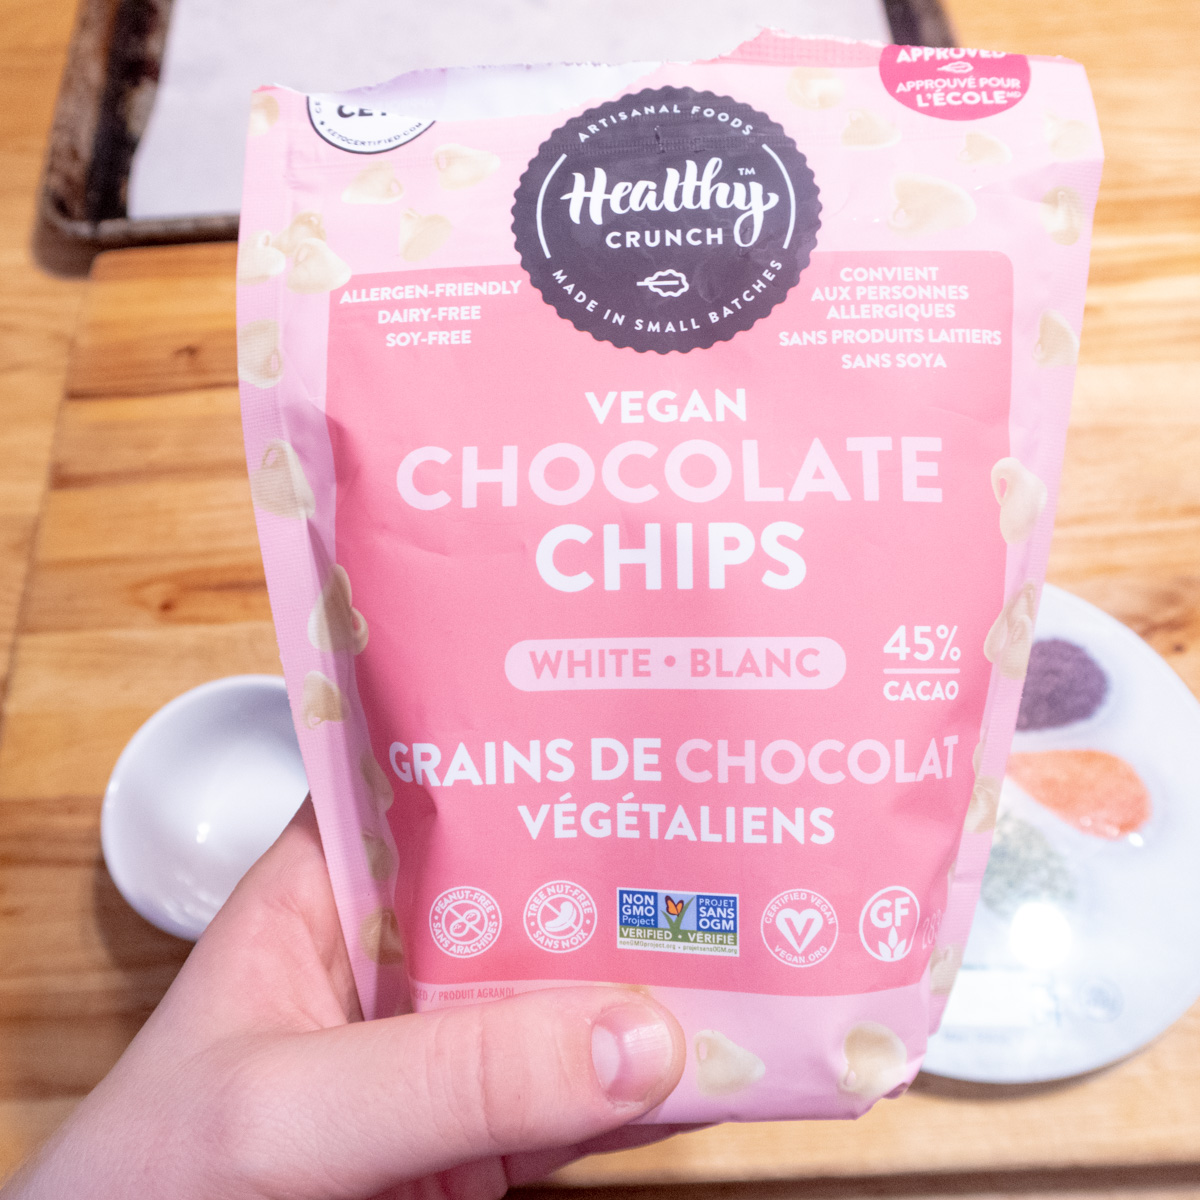 A bag of Healthy Crunch vegan white chocolate chips.